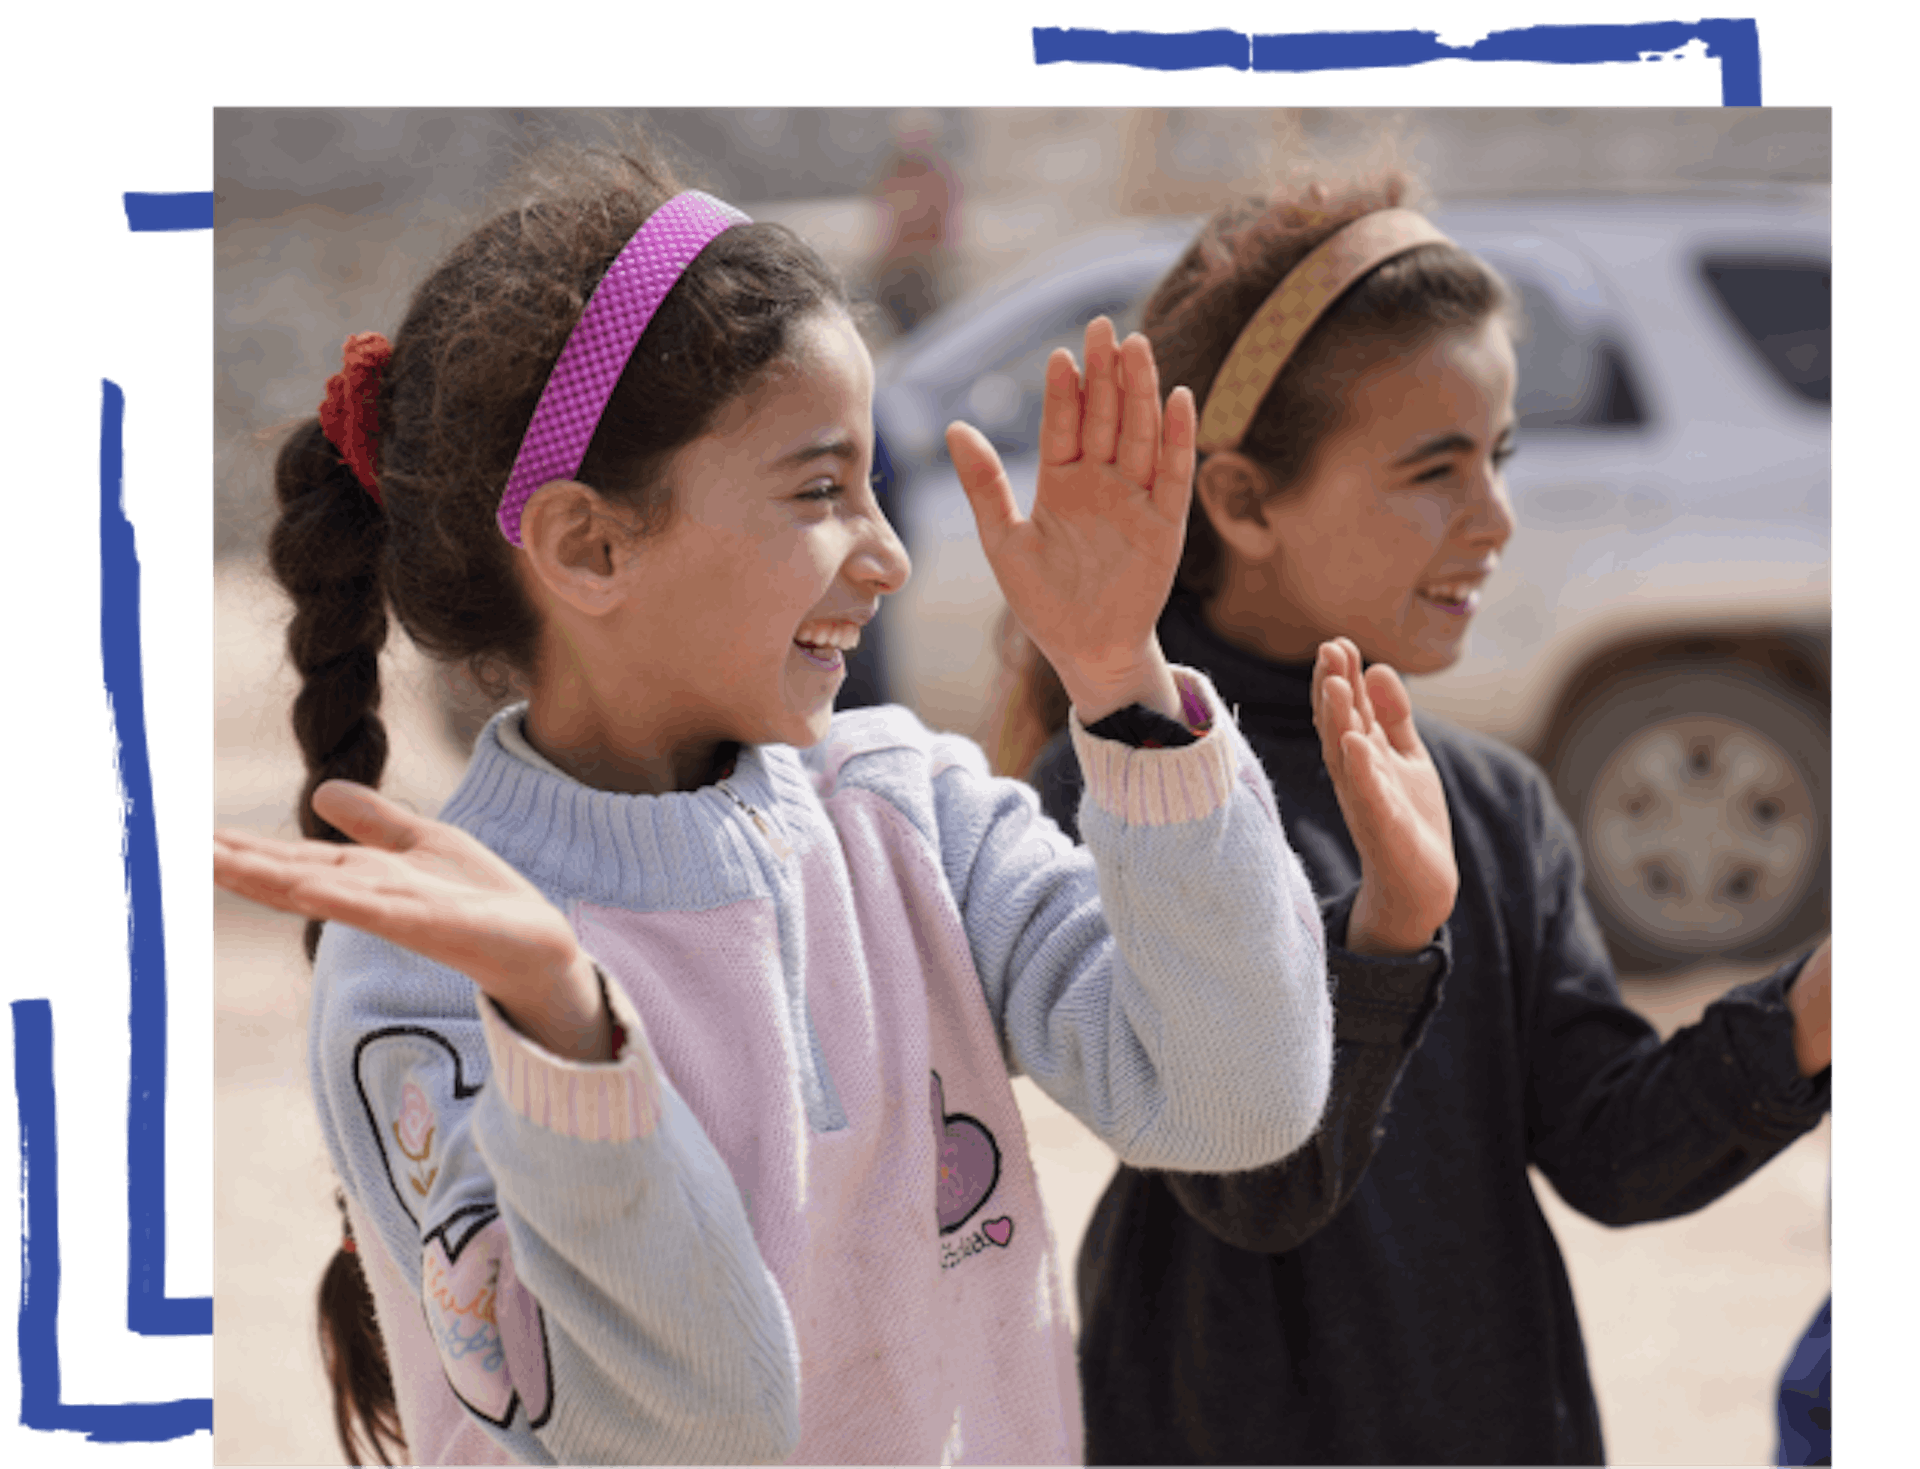 Health & Medicine- Children in Killi Camp in Idlib province of Syria take part in recreational activities and psychosocial support sessions for children affected by the earthquake, provided by the specialized protection teams of UNICEF partner Shafak Organization.